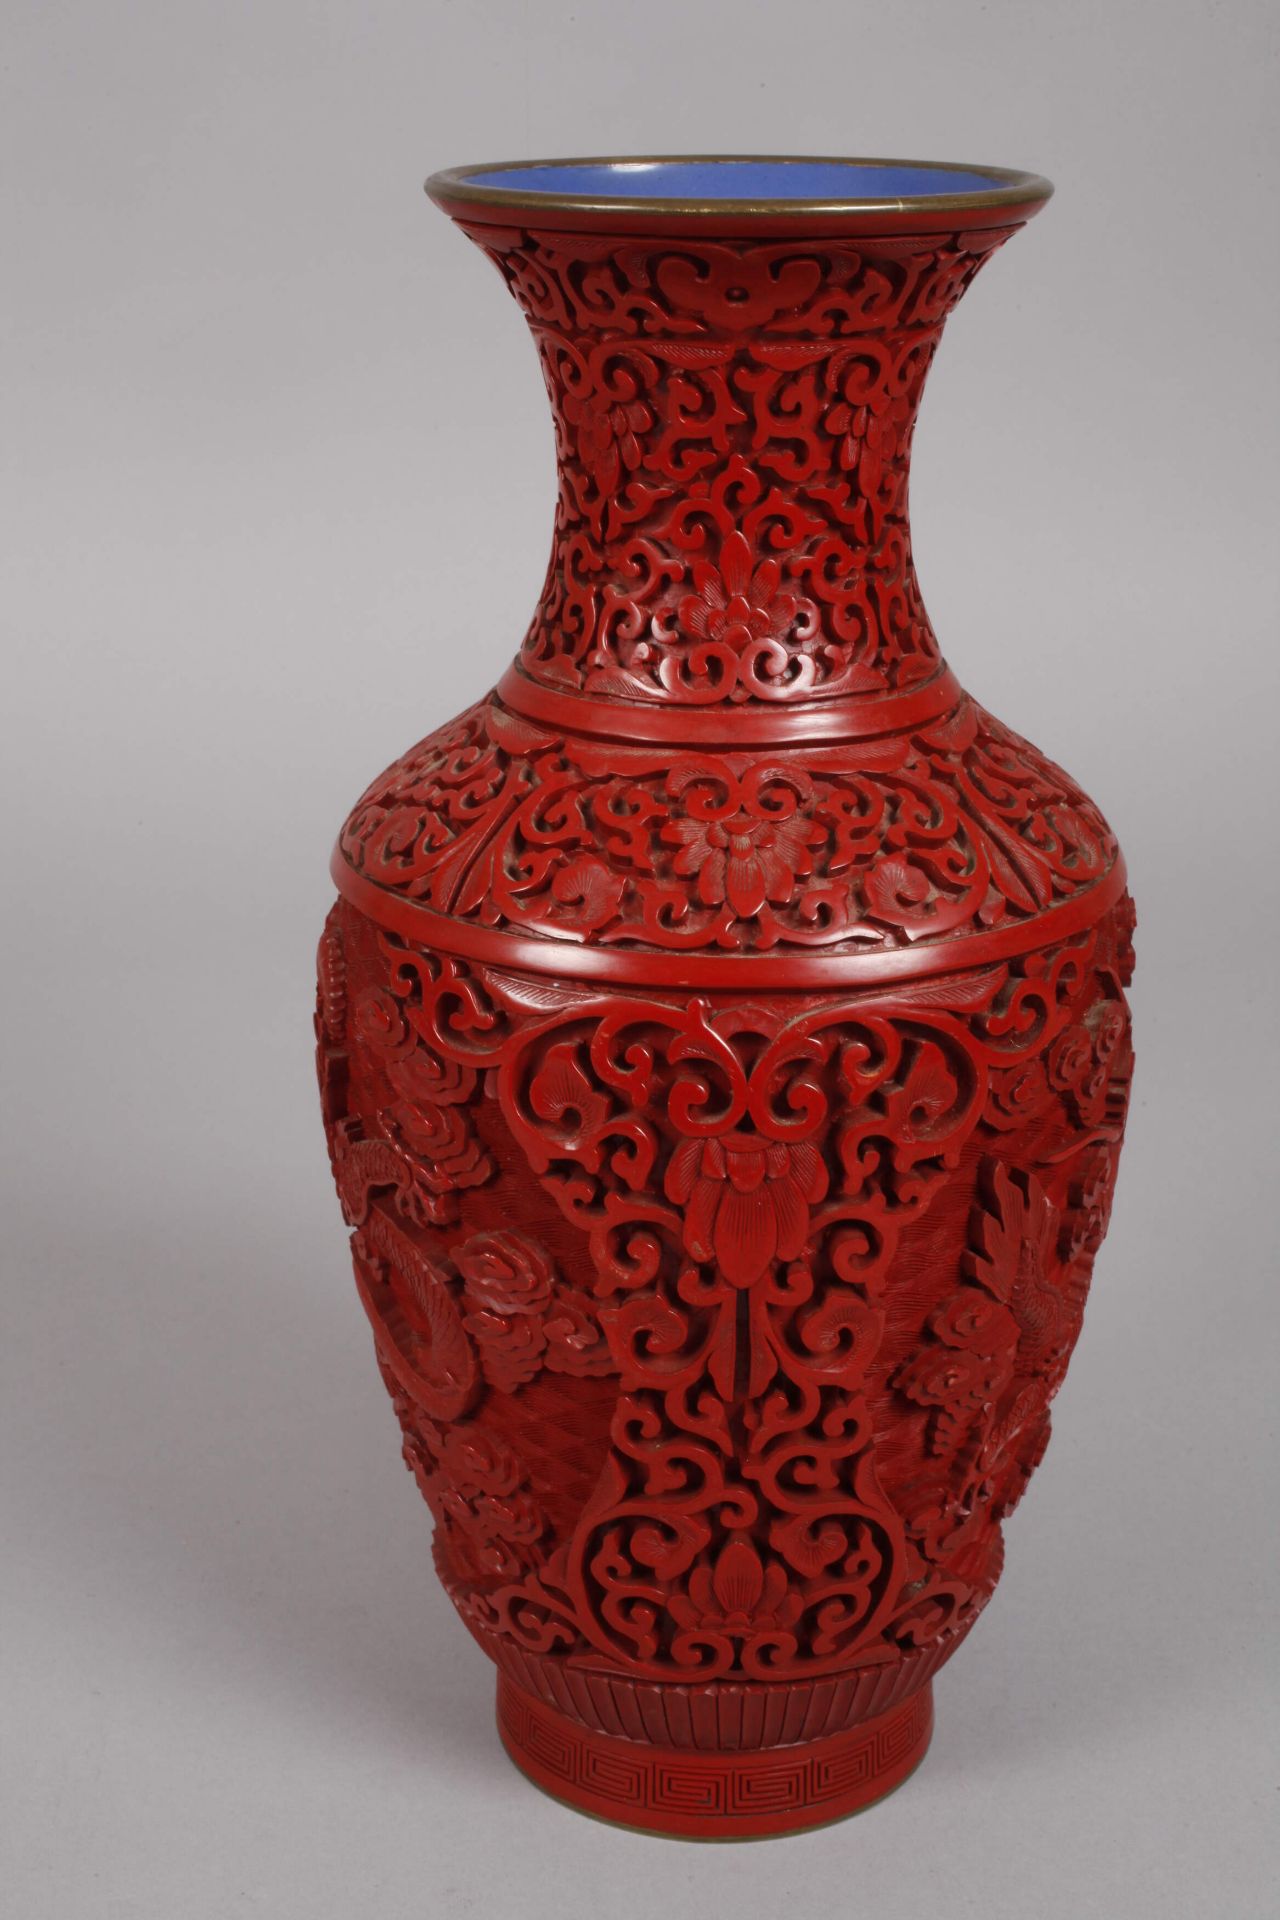 Pair of vases, lacquer carving - Image 3 of 6